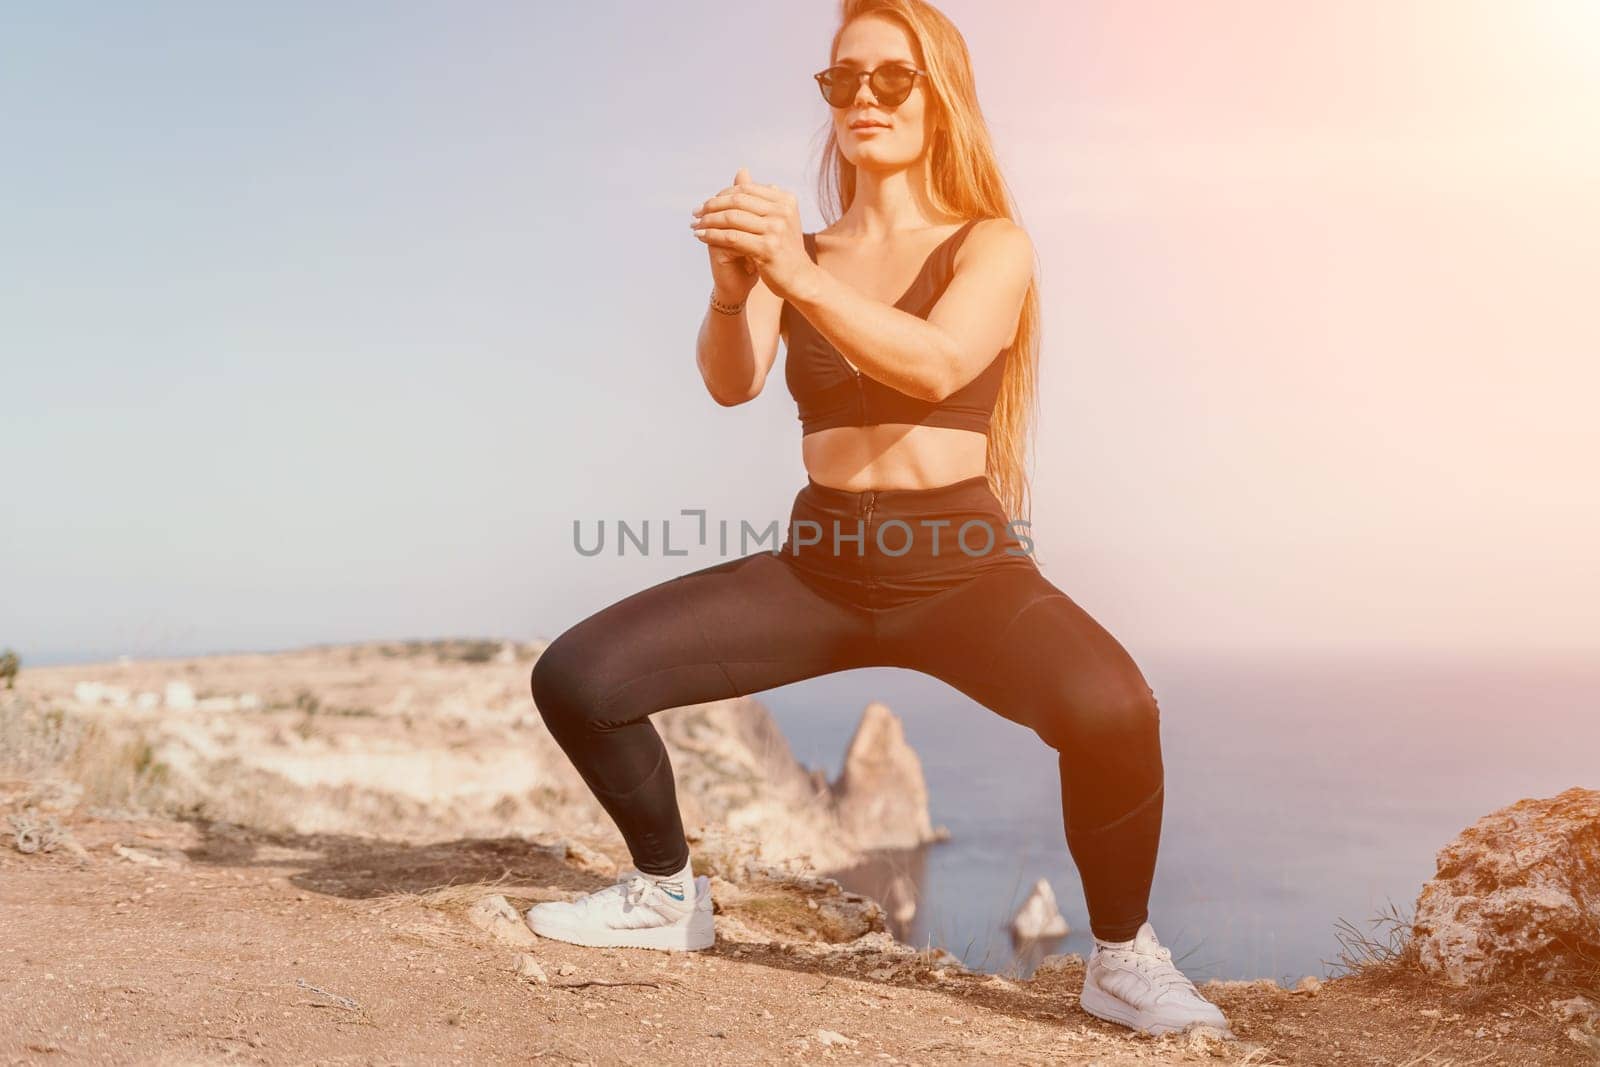 Fitness woman sea. Outdoor workout on yoga mat in park near to ocean beach. Female fitness pilates yoga routine concept. Healthy lifestyle. Happy fit woman exercising with rubber band in park. by panophotograph